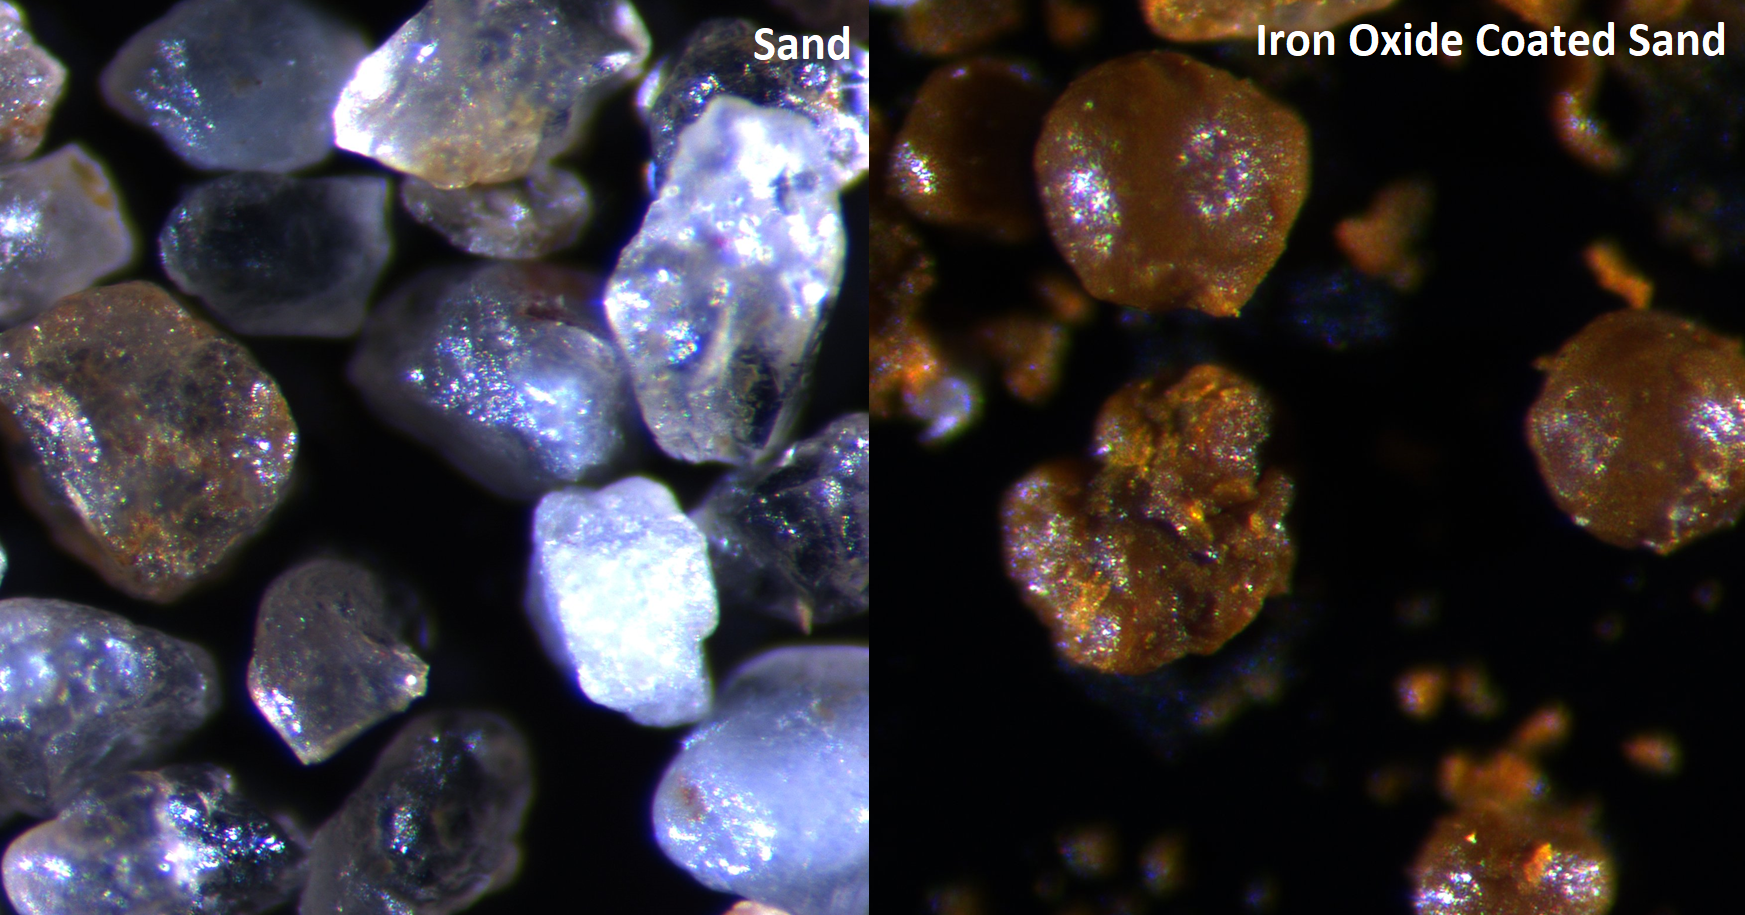 Iron-oxide coated sands created in the lab styles=